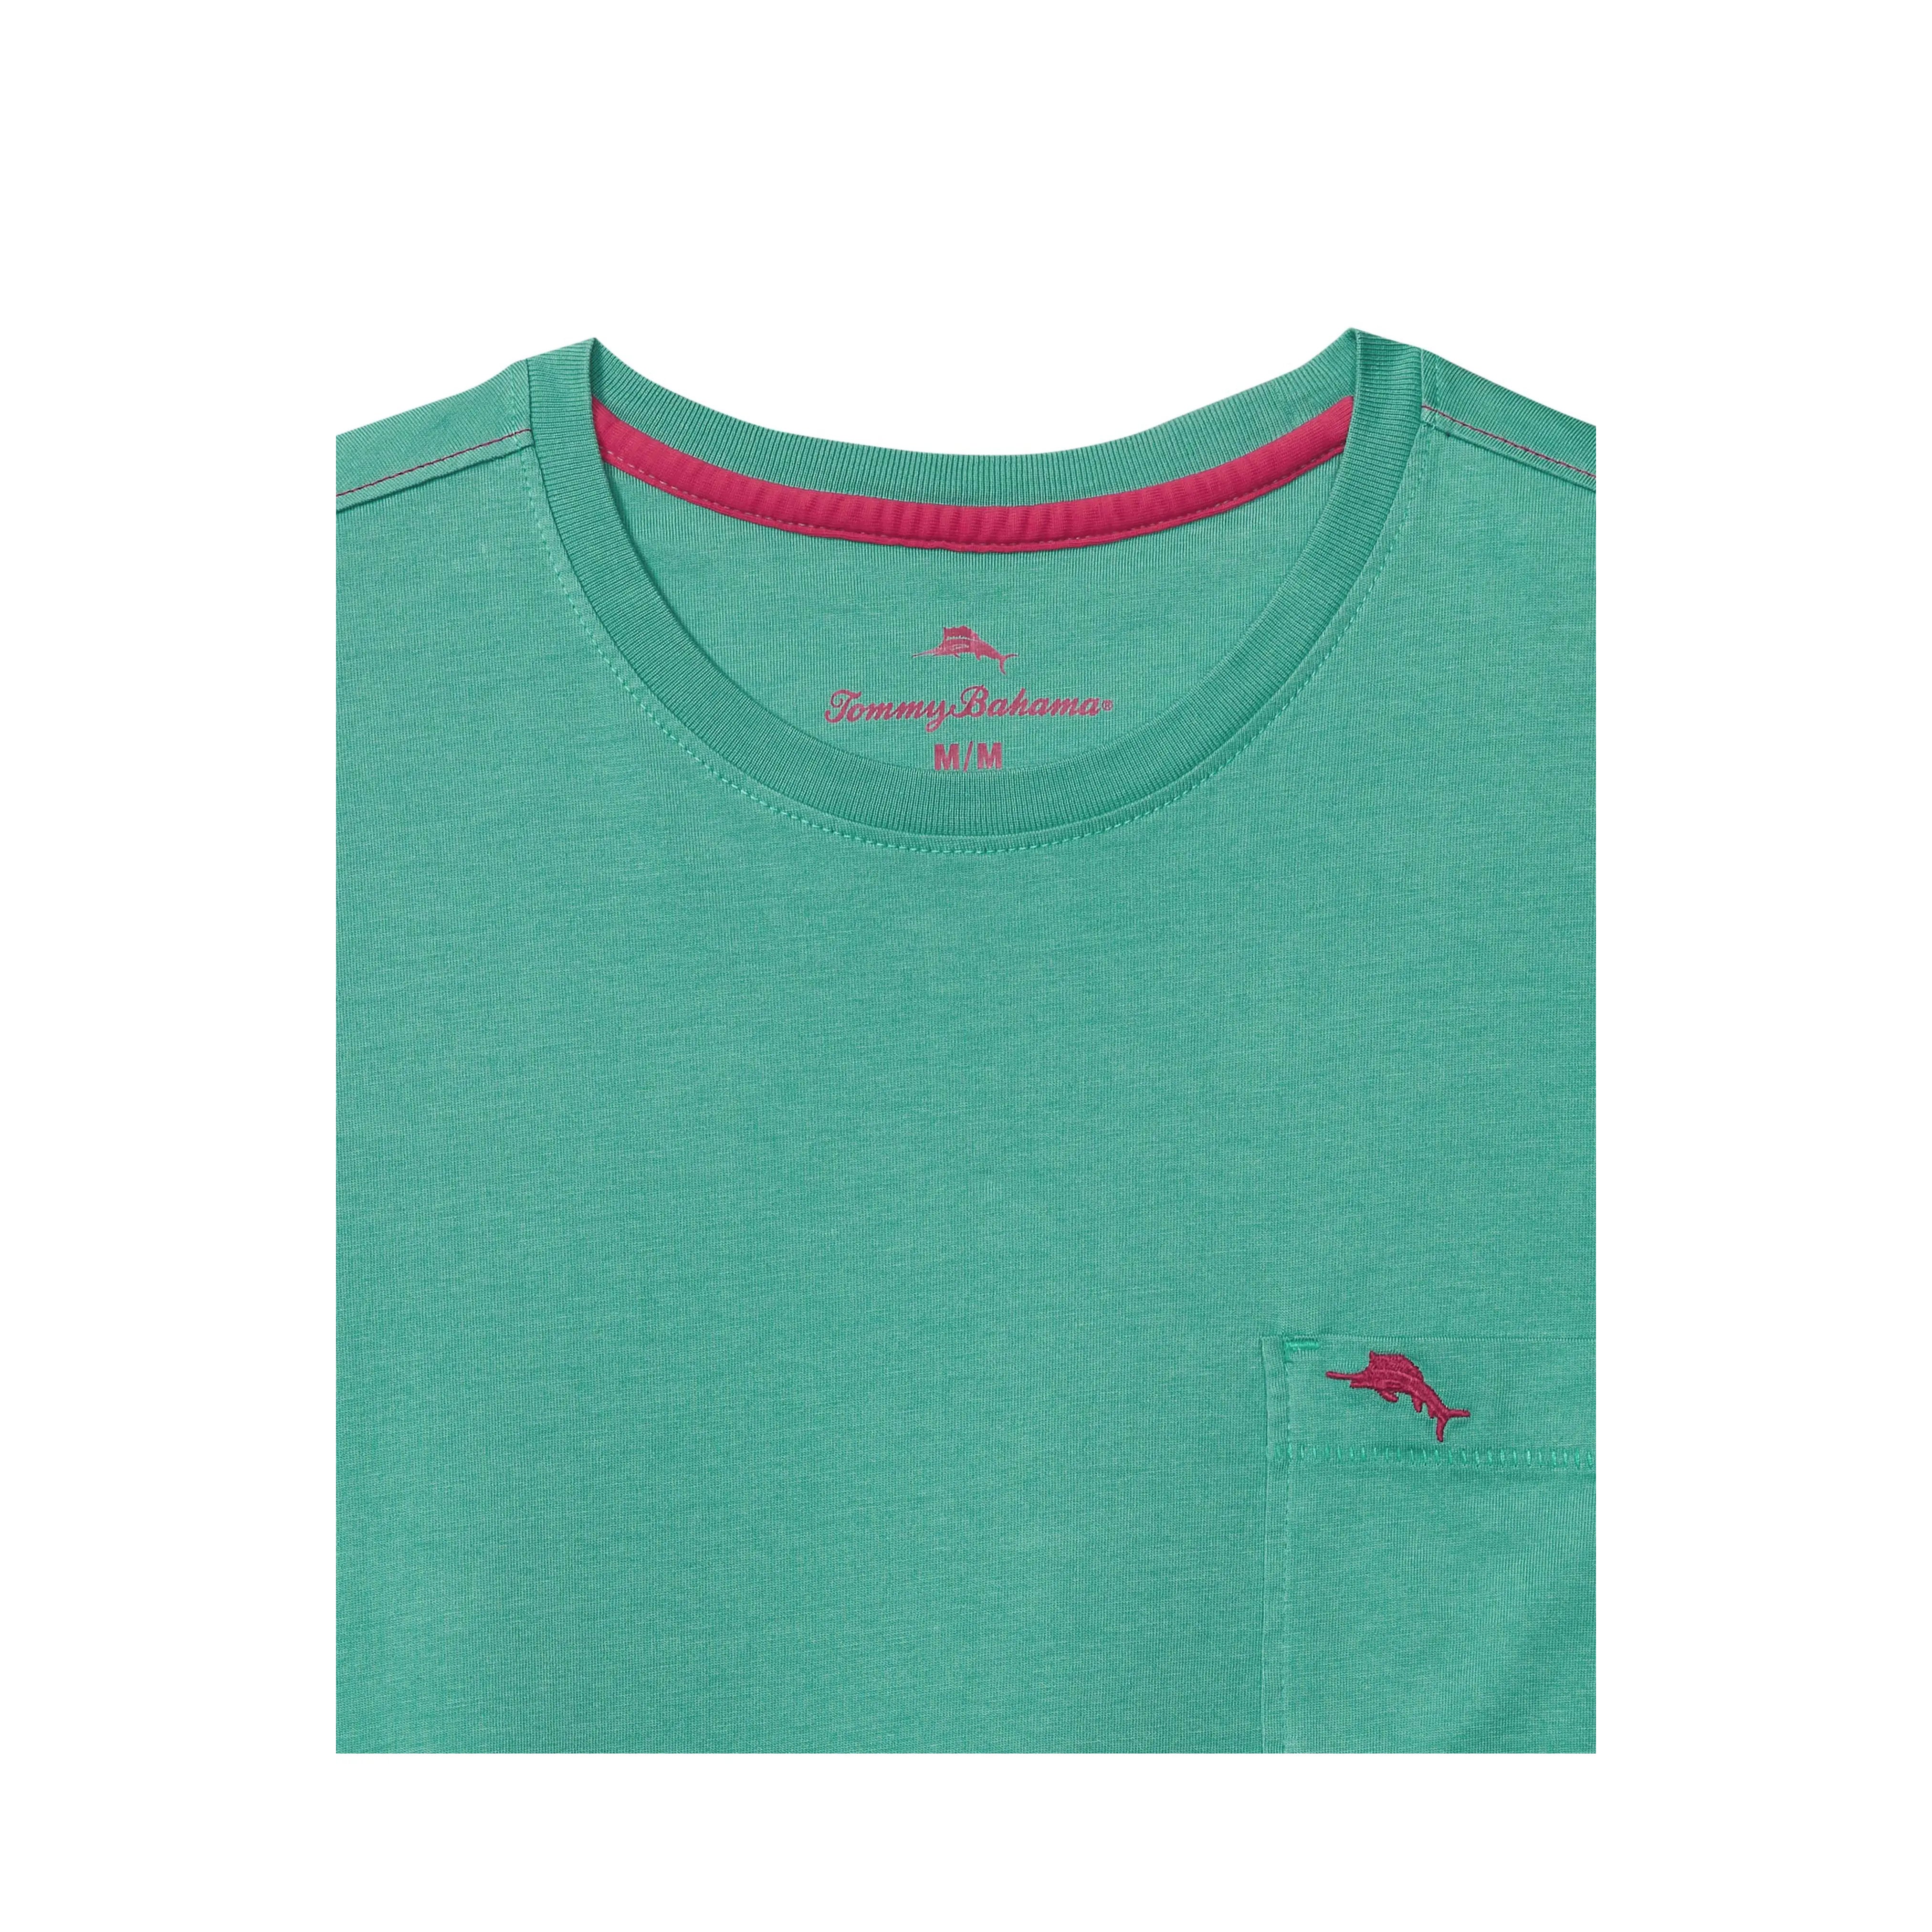 'Tommy Bahama Bali Skyline Tee' in 'Cabo Teal' colour